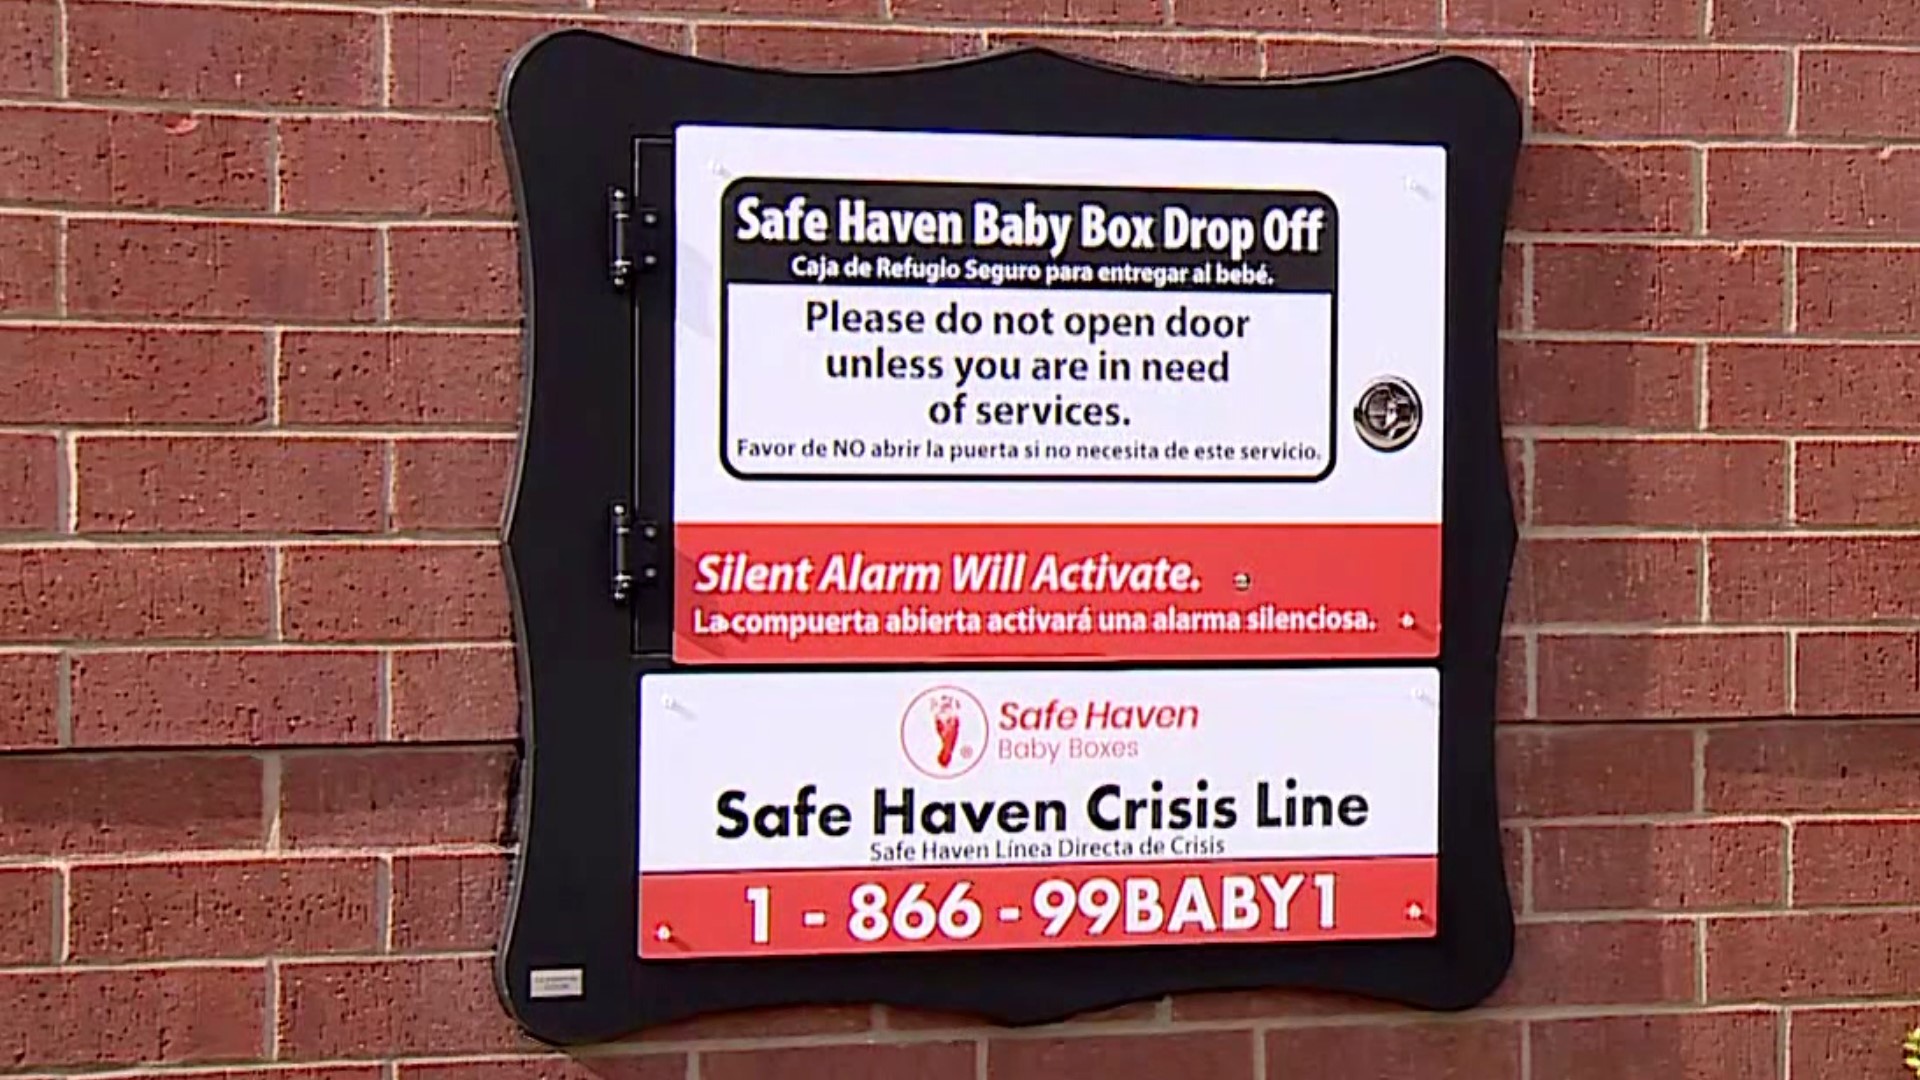 A safe haven box is a device provided under Arkansas’s state safe haven law, allowing a mother in crisis to surrender her newborn instead of abandoning it.